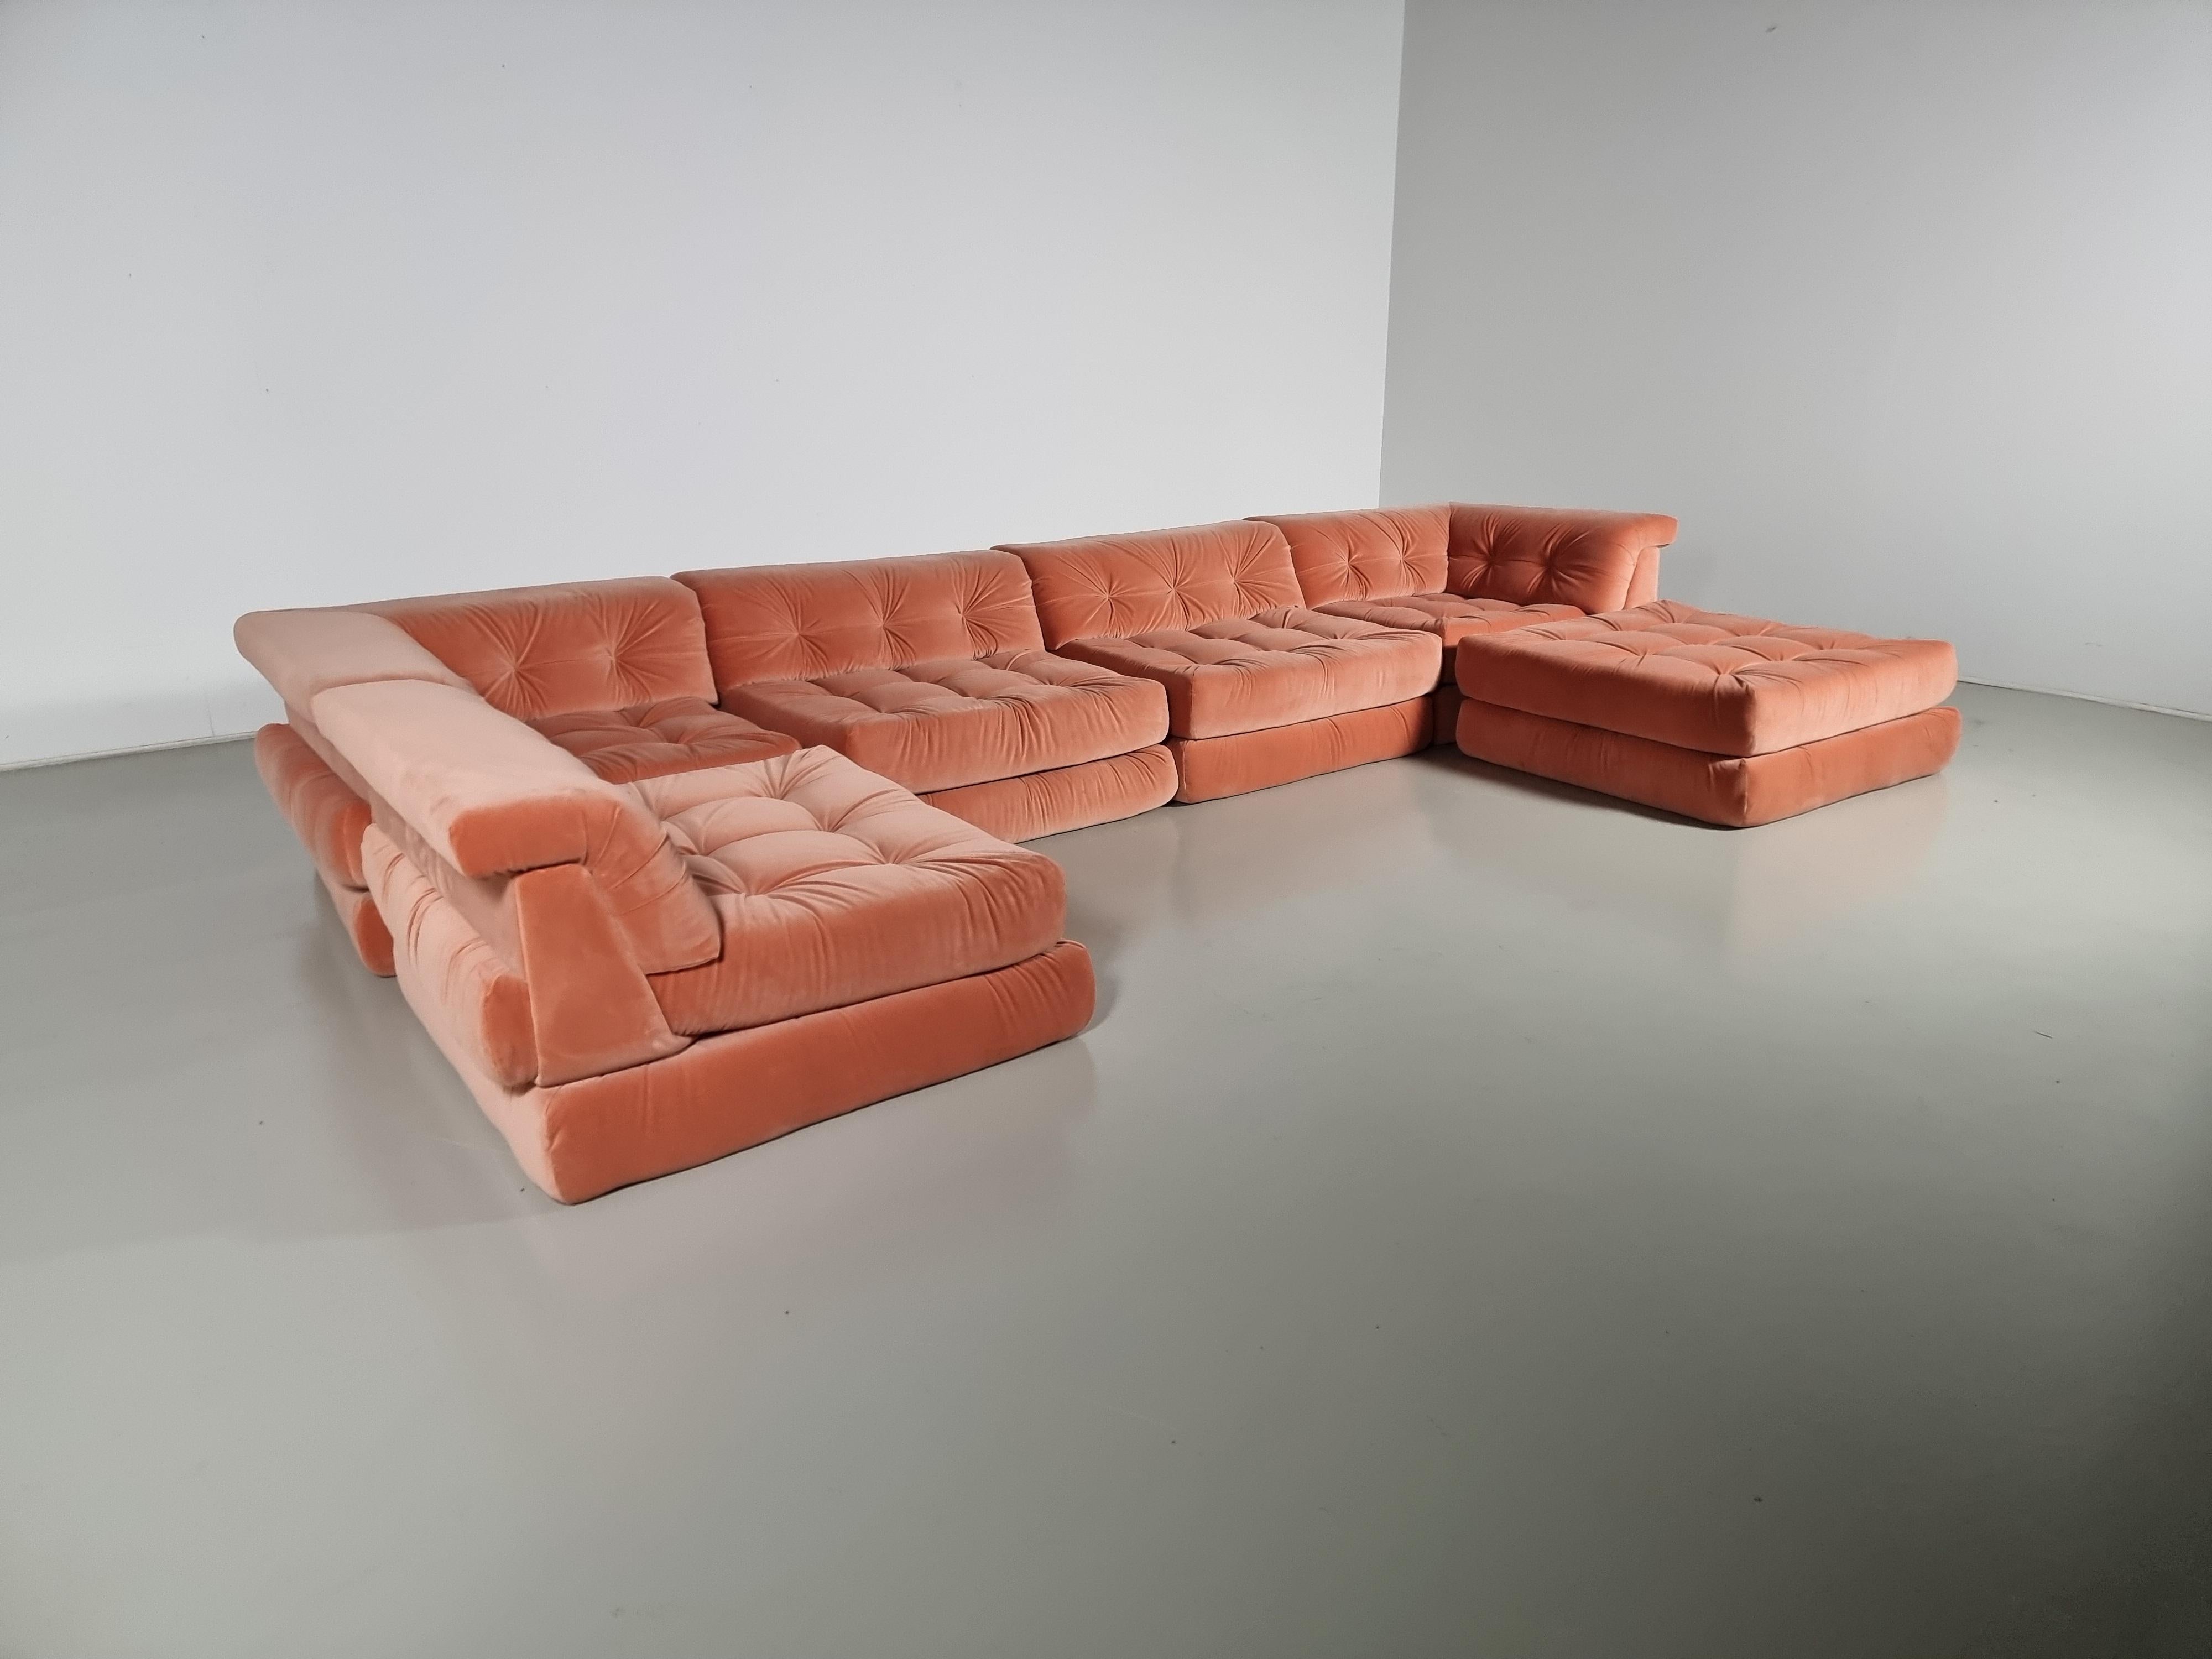 1st edition reupholstered Mah Jong modular sofa set by Hans Hopfer, designed in 1971 for Roche Bobois. It features multiple cushions that can be arranged in an endless number of ways, This set includes 12 cushions and 5 backrests. 

Hopfer’s Mah